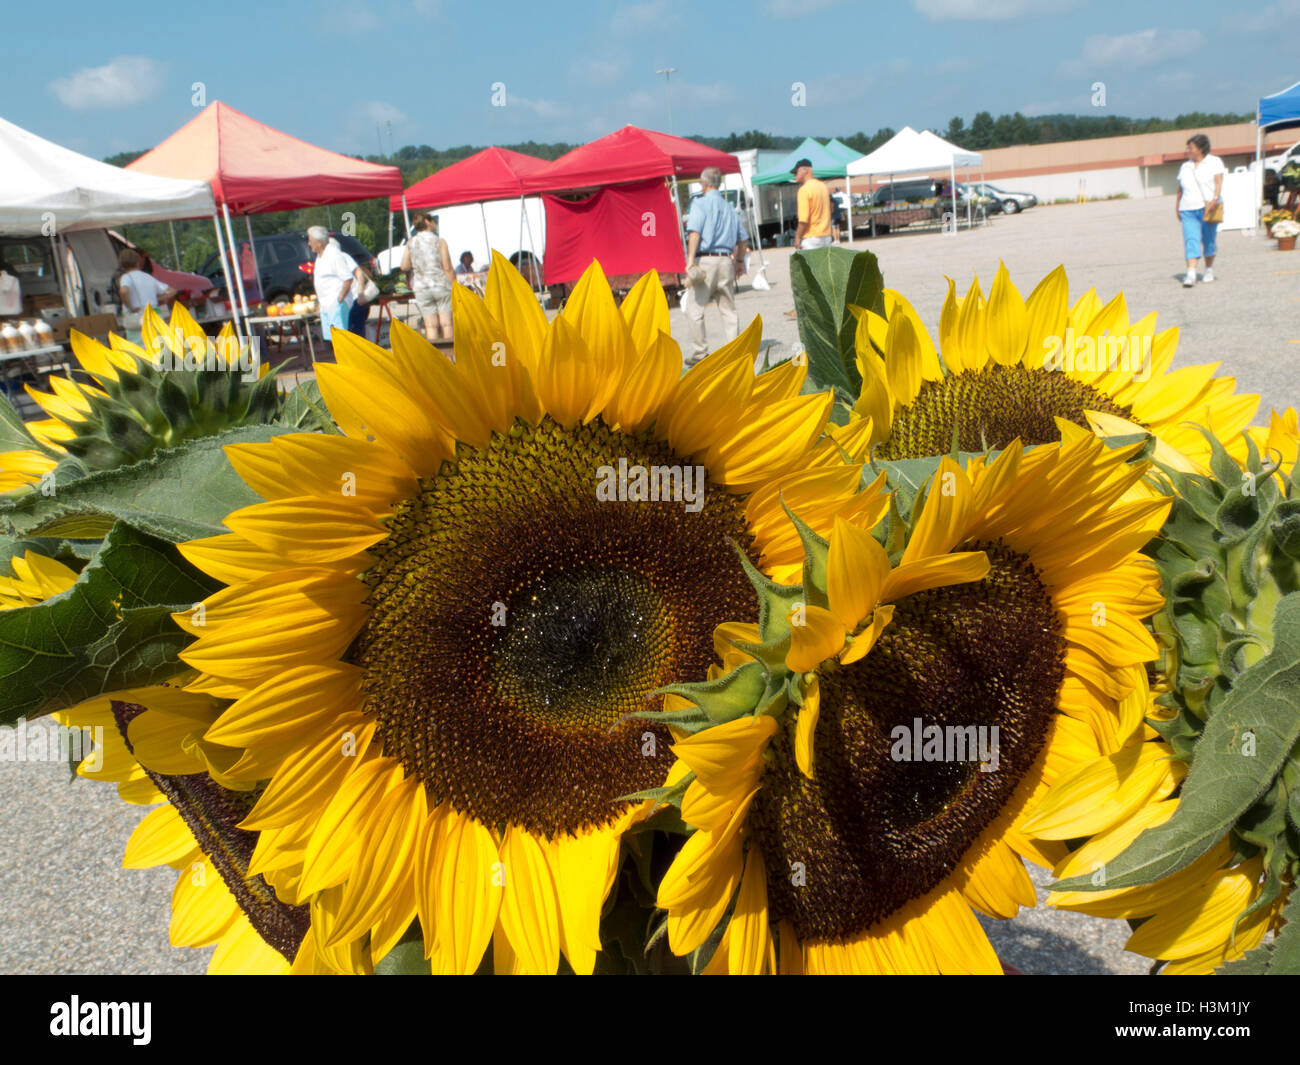 Sunflowers for sale at a farmers market. Stock Photo